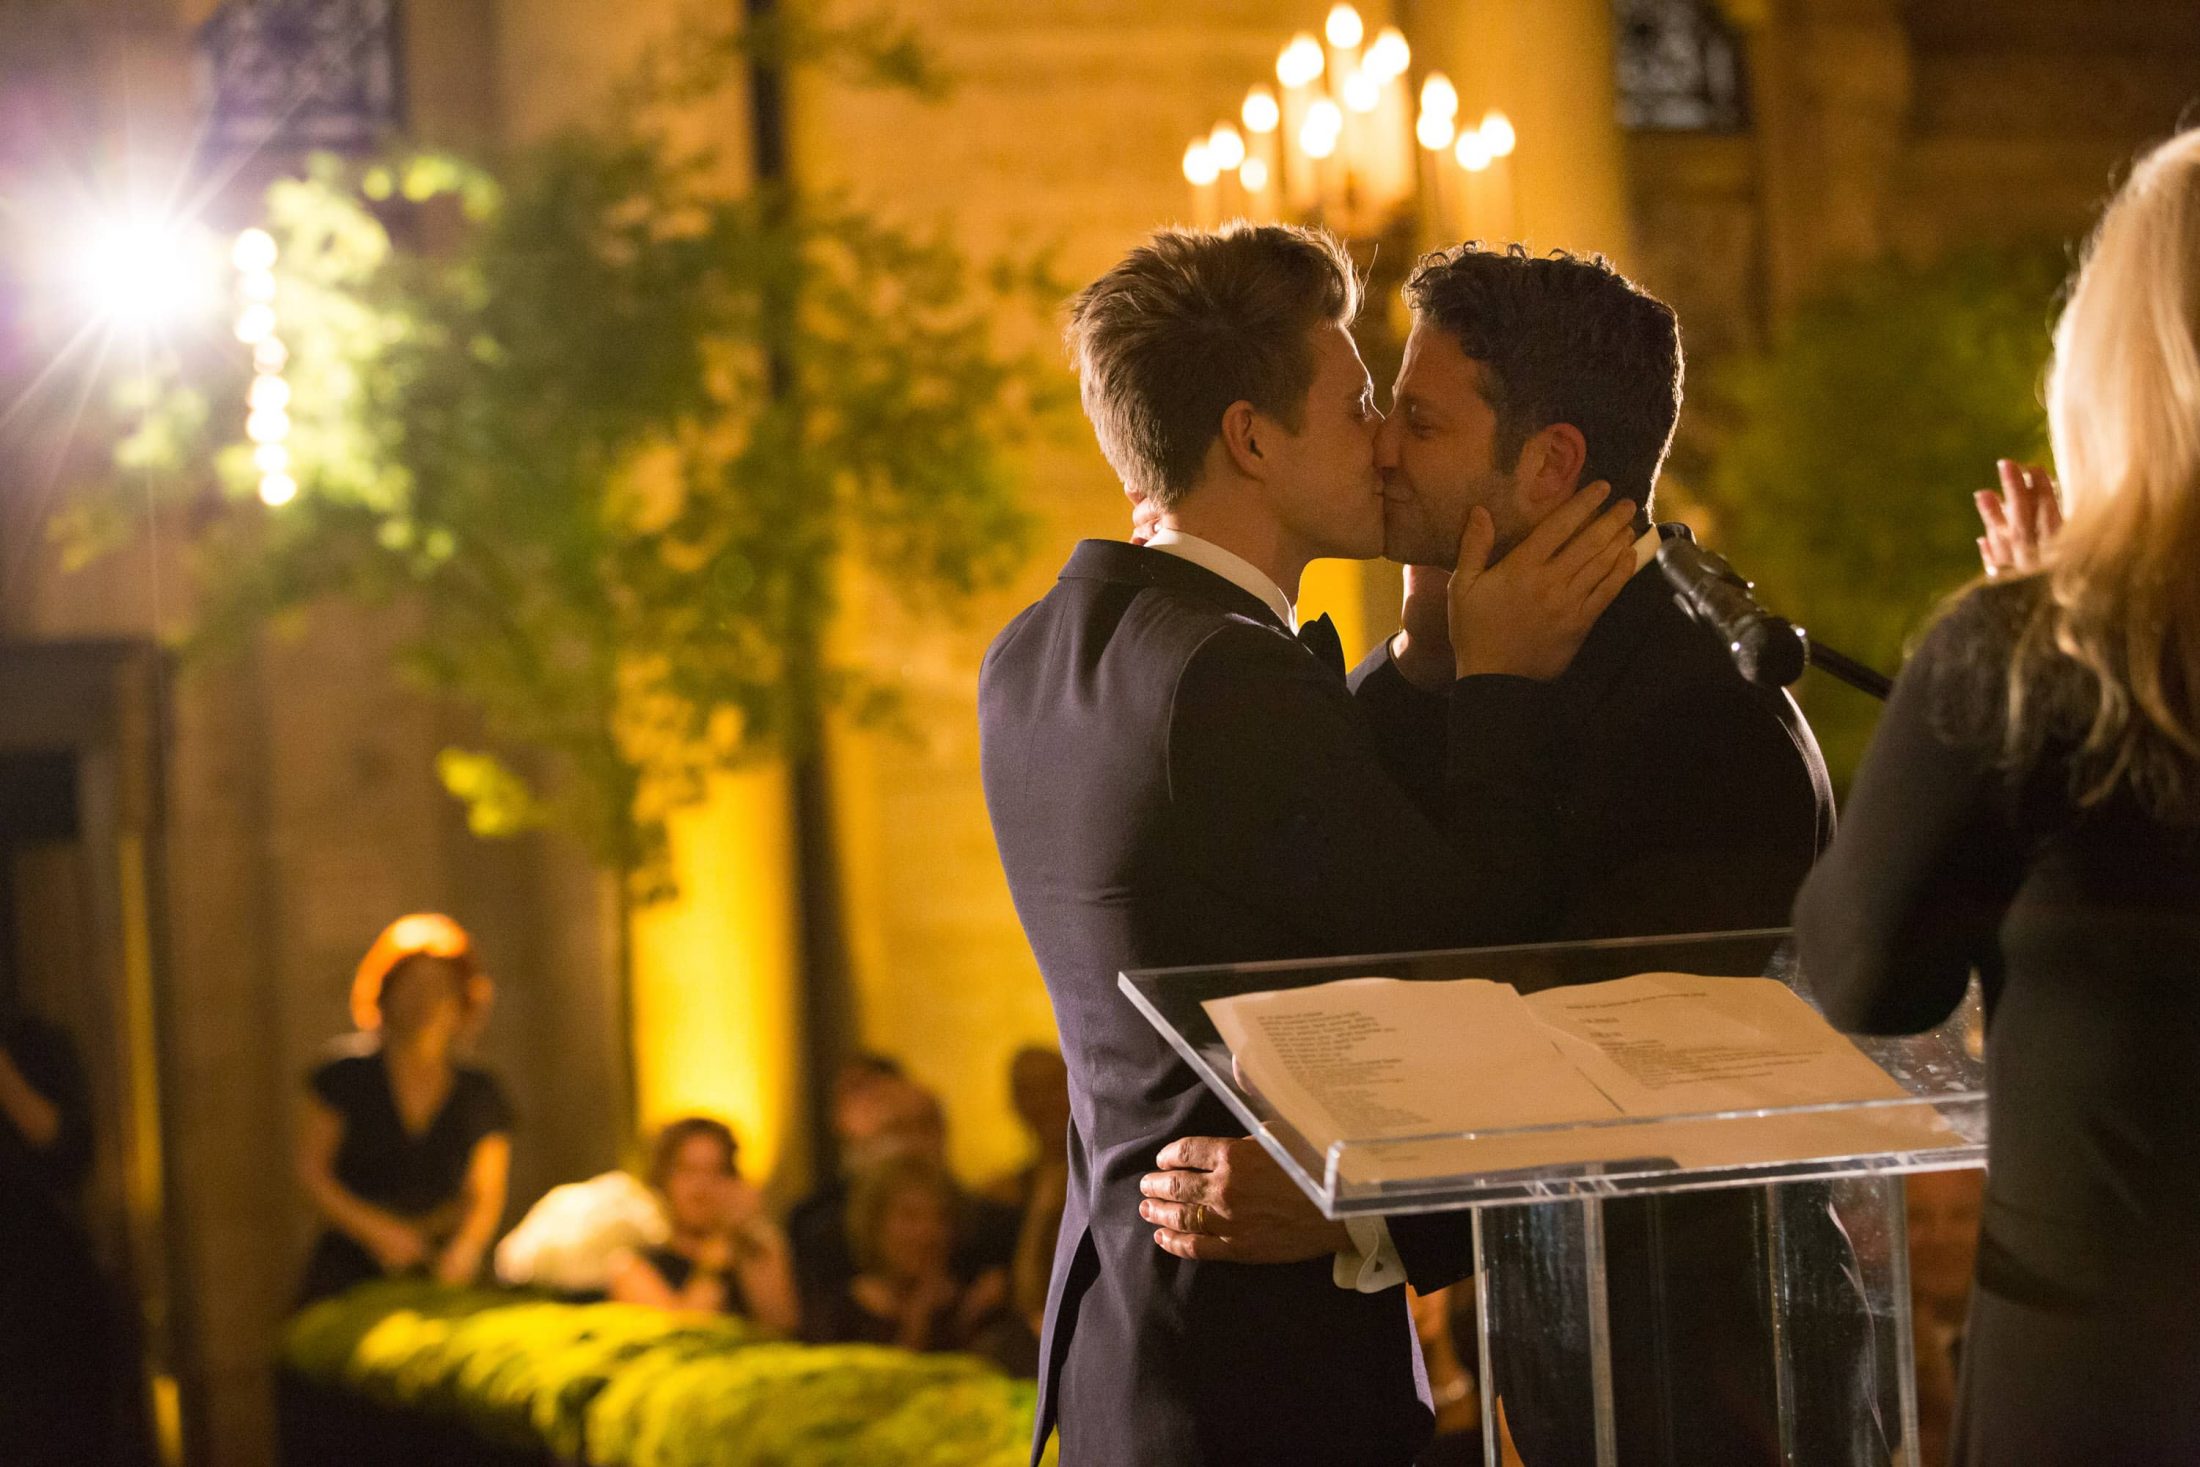 Grooms kiss during ceremony at this New York Public Library wedding | Photo by Genevieve de Manio